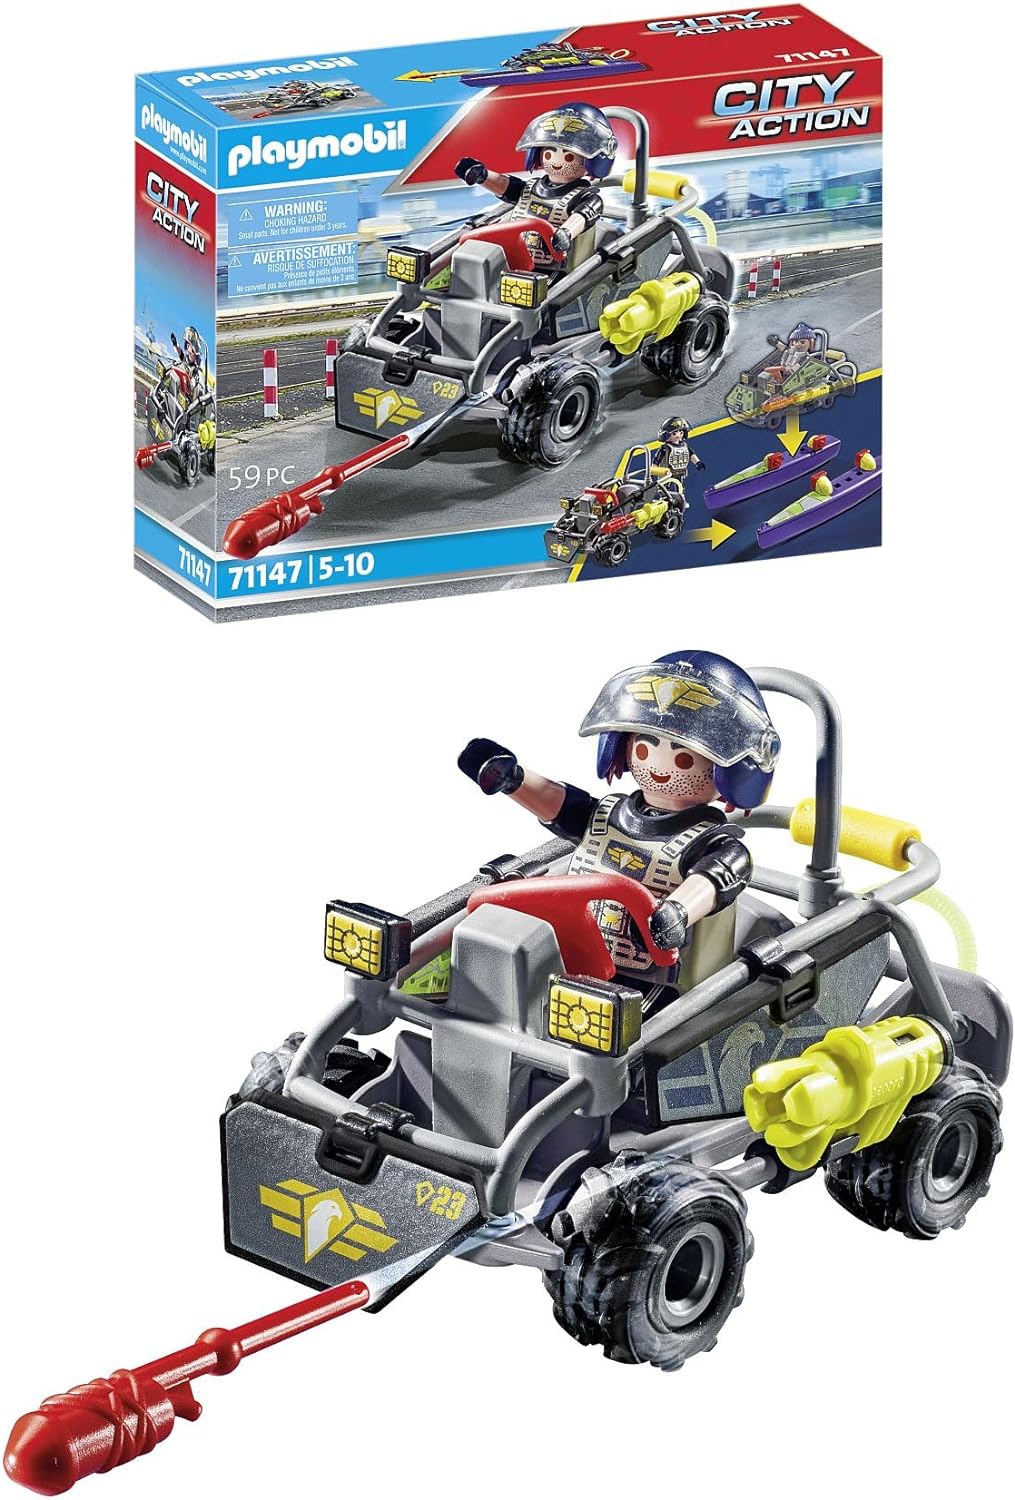 PLAYMOBIL City Action 71147 SWAT Multi-Terrain Quad Convertible SEK Speed Boat Toy for Children from 5 Years